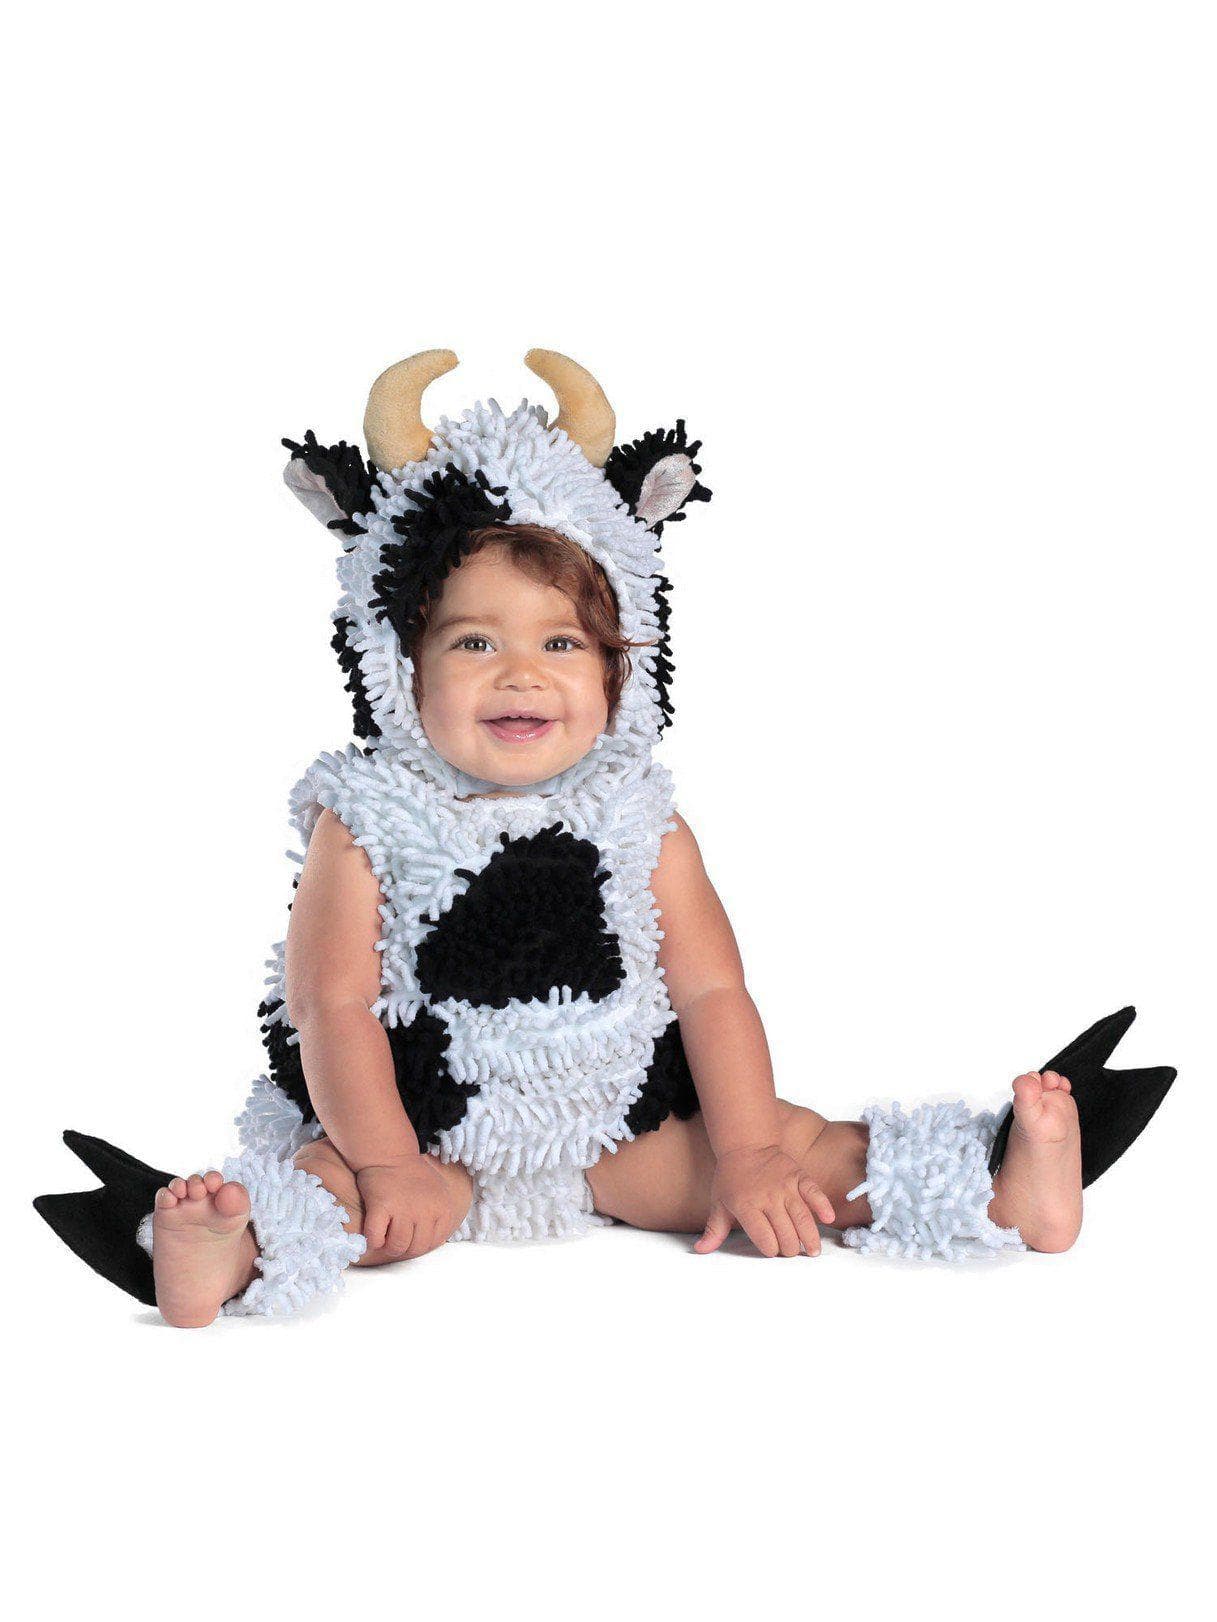 Black and White Kelly the Cow Costume for Babies - costumes.com